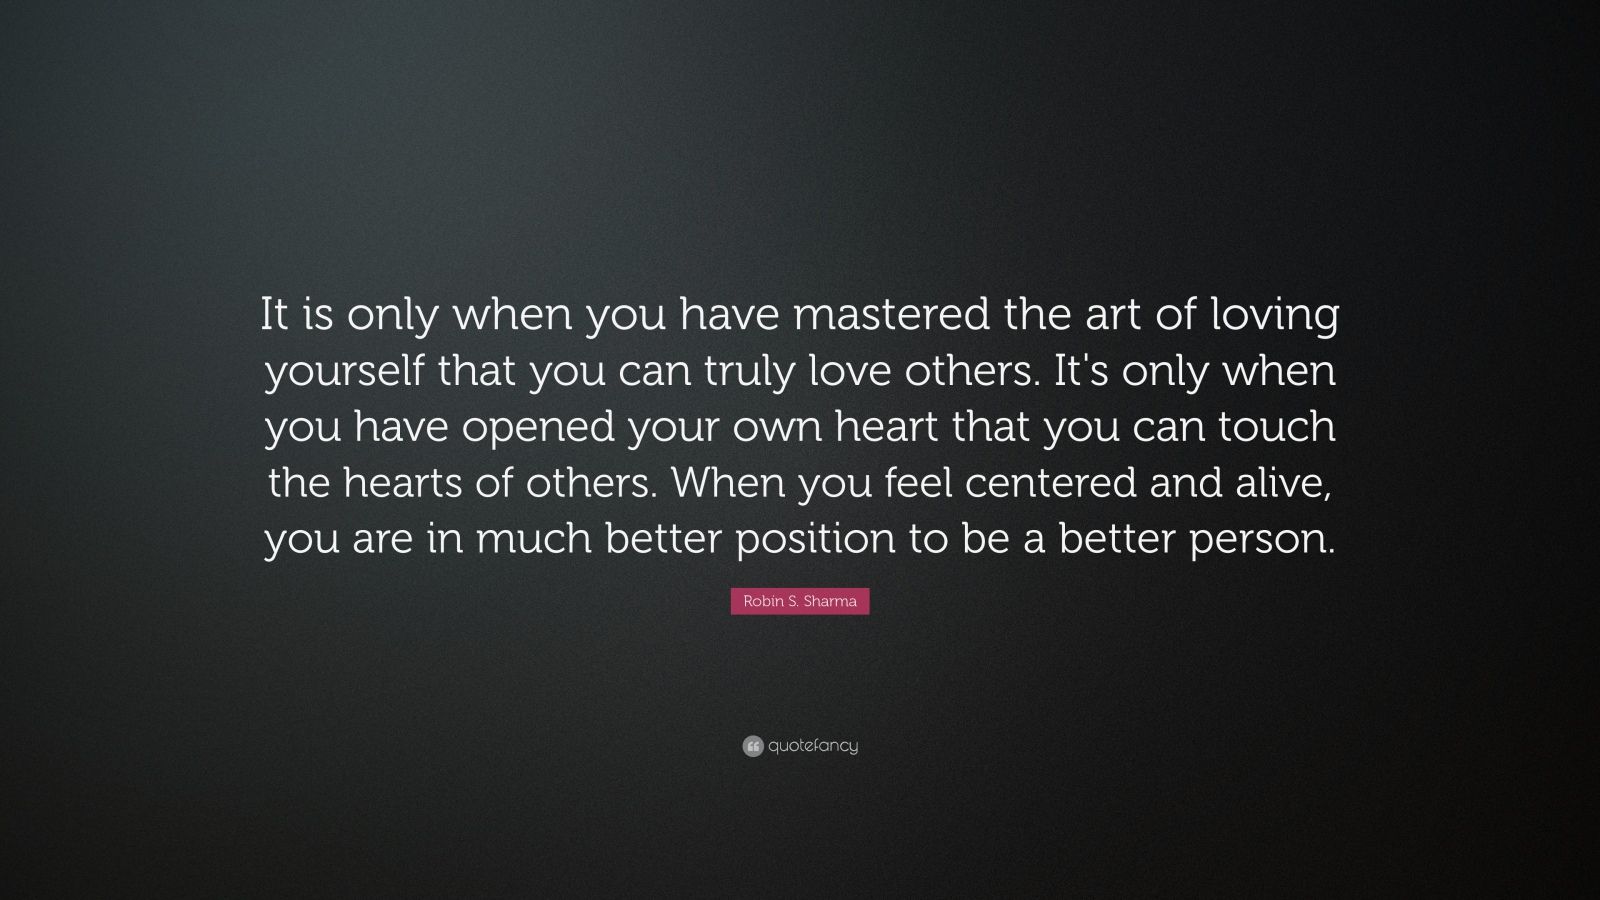 Robin S. Sharma Quote: “It is only when you have mastered the art of ...